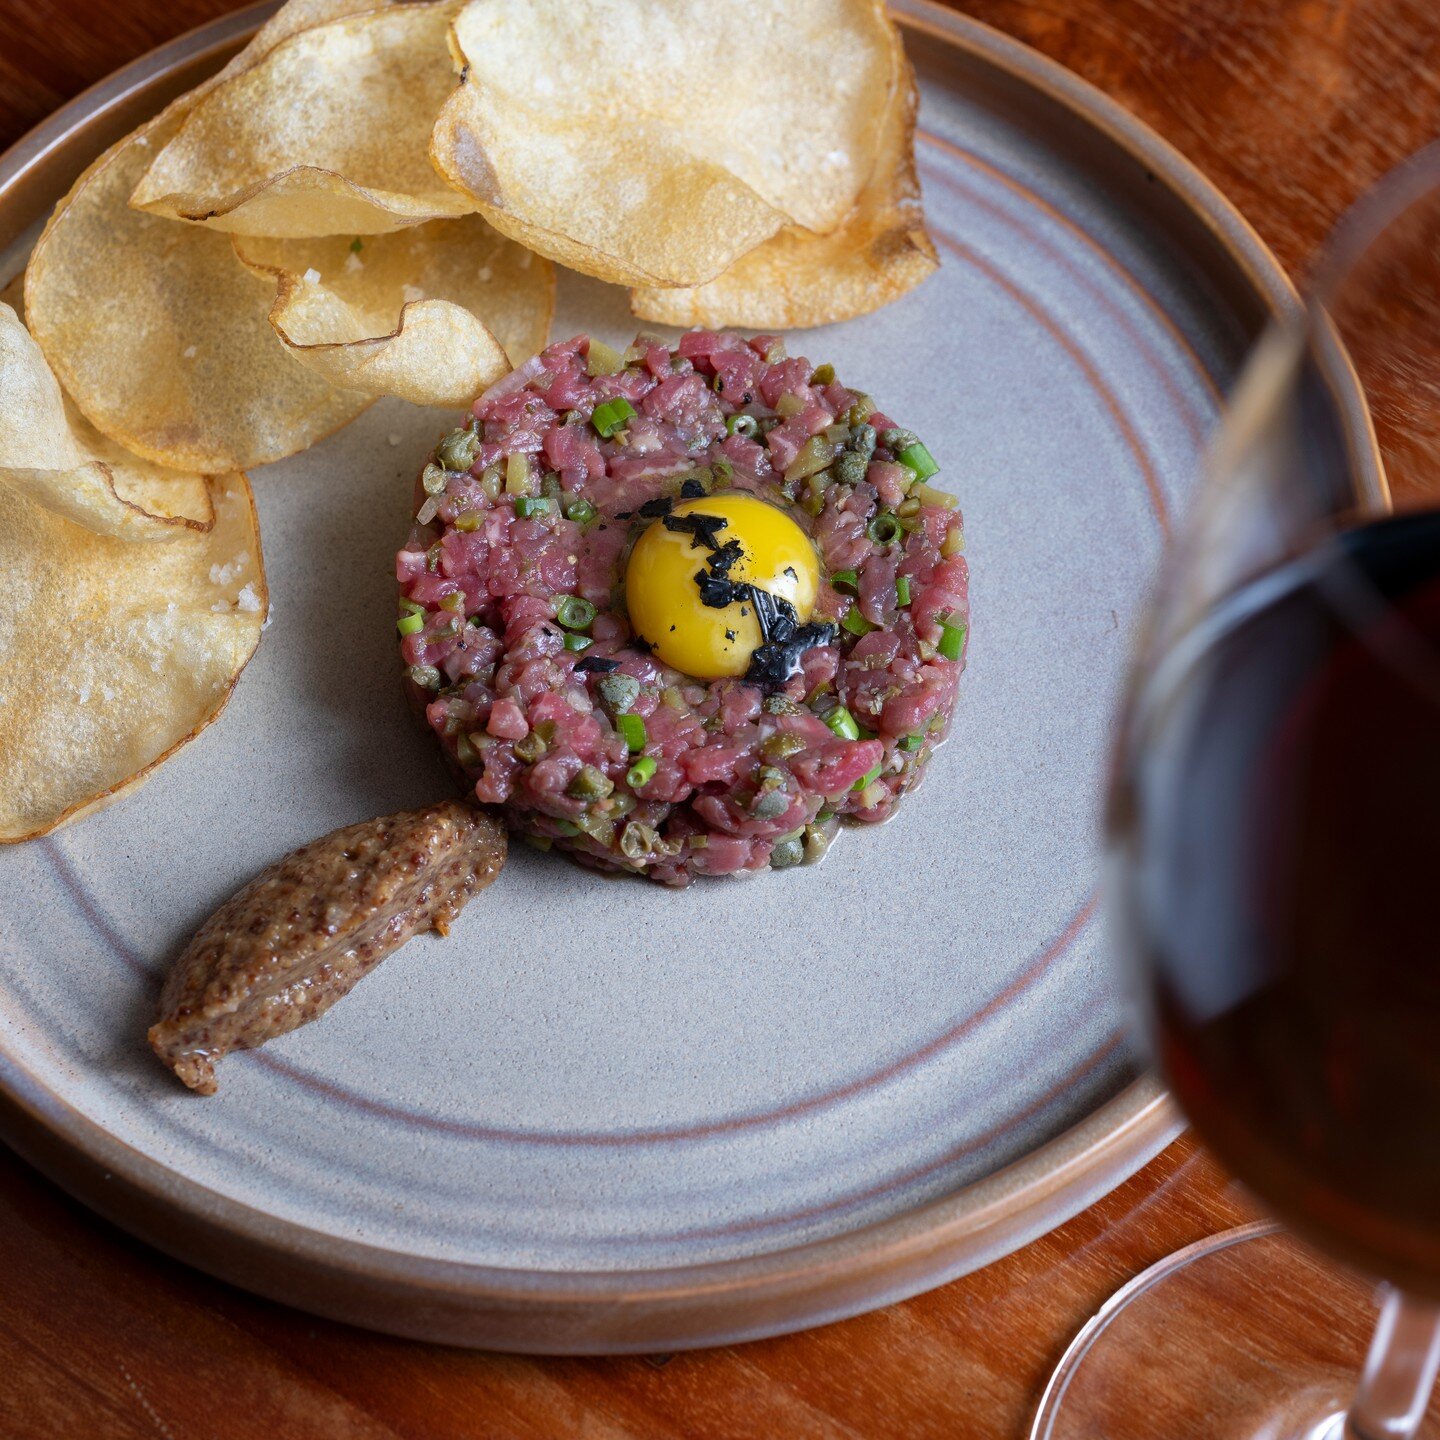 No one knows exactly where steak tartare originated, but we know Harvey Beef Reserve is the best quality out there!

Have you tried our beef tartare yet?